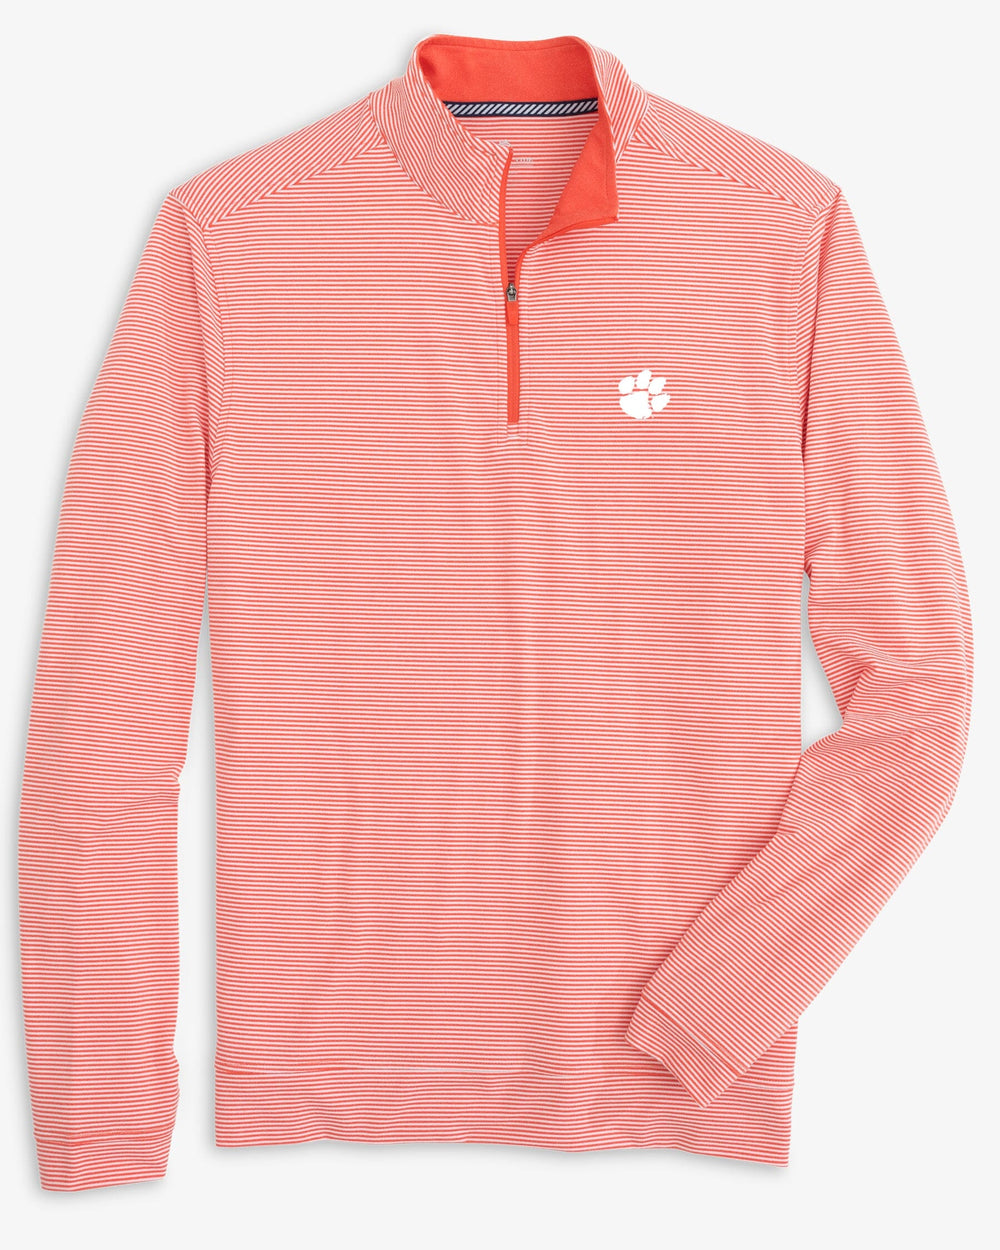 The front view of the Clemson Tigers Cruiser Micro-Stripe Heather Quarter Zip by Southern Tide - Heather Endzone Orange